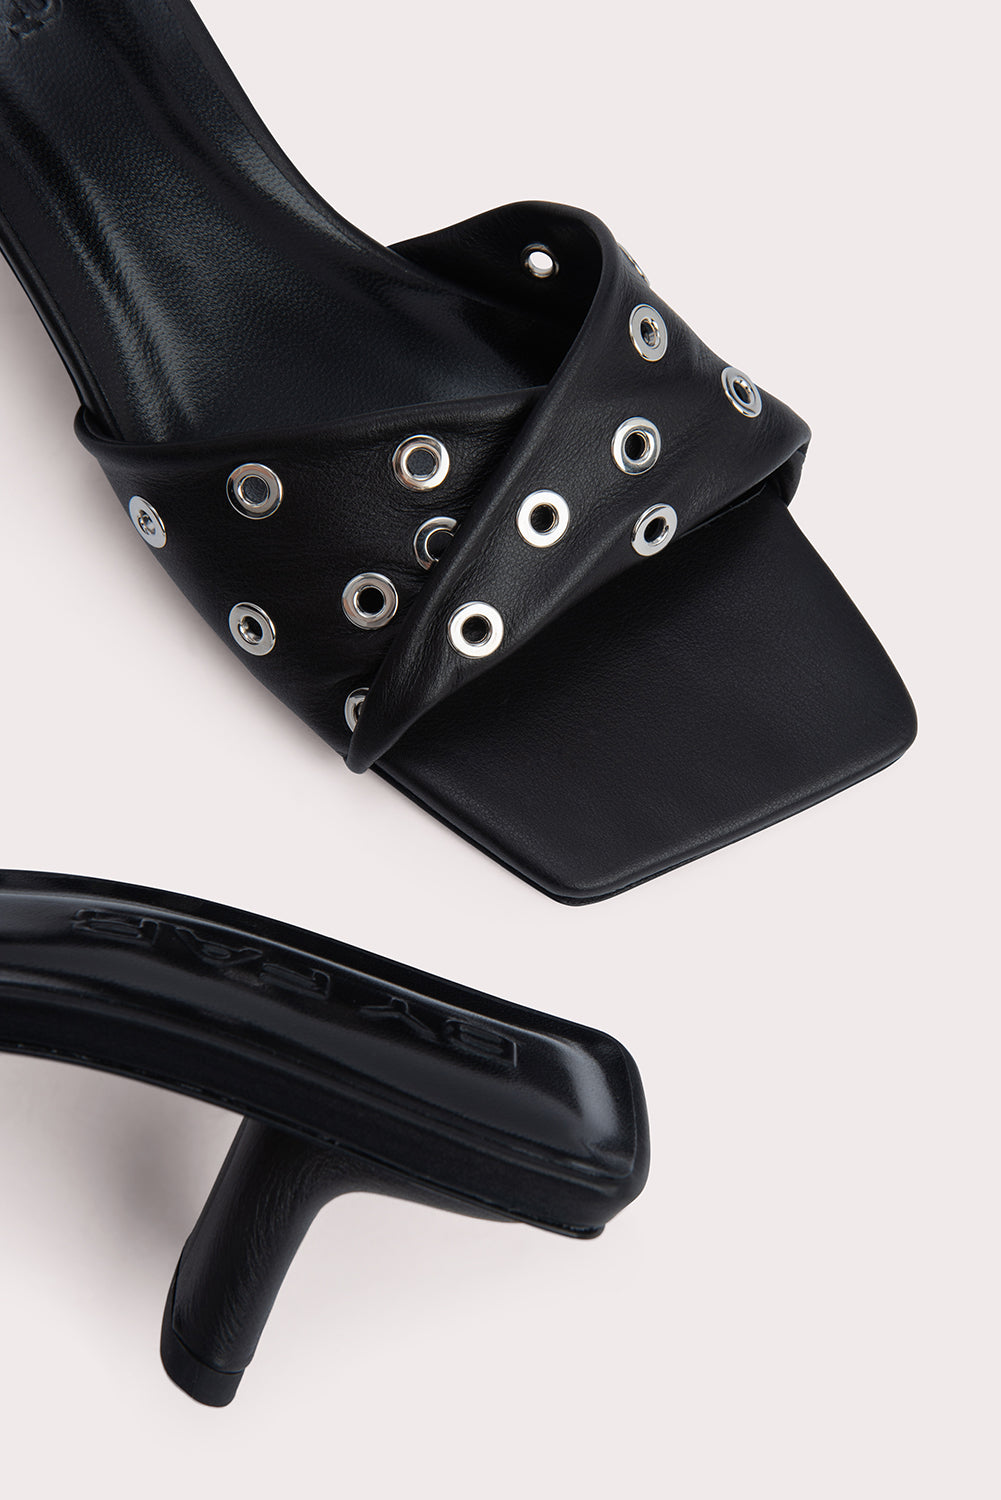 Rocco Black Nappa Leather and Eyelets